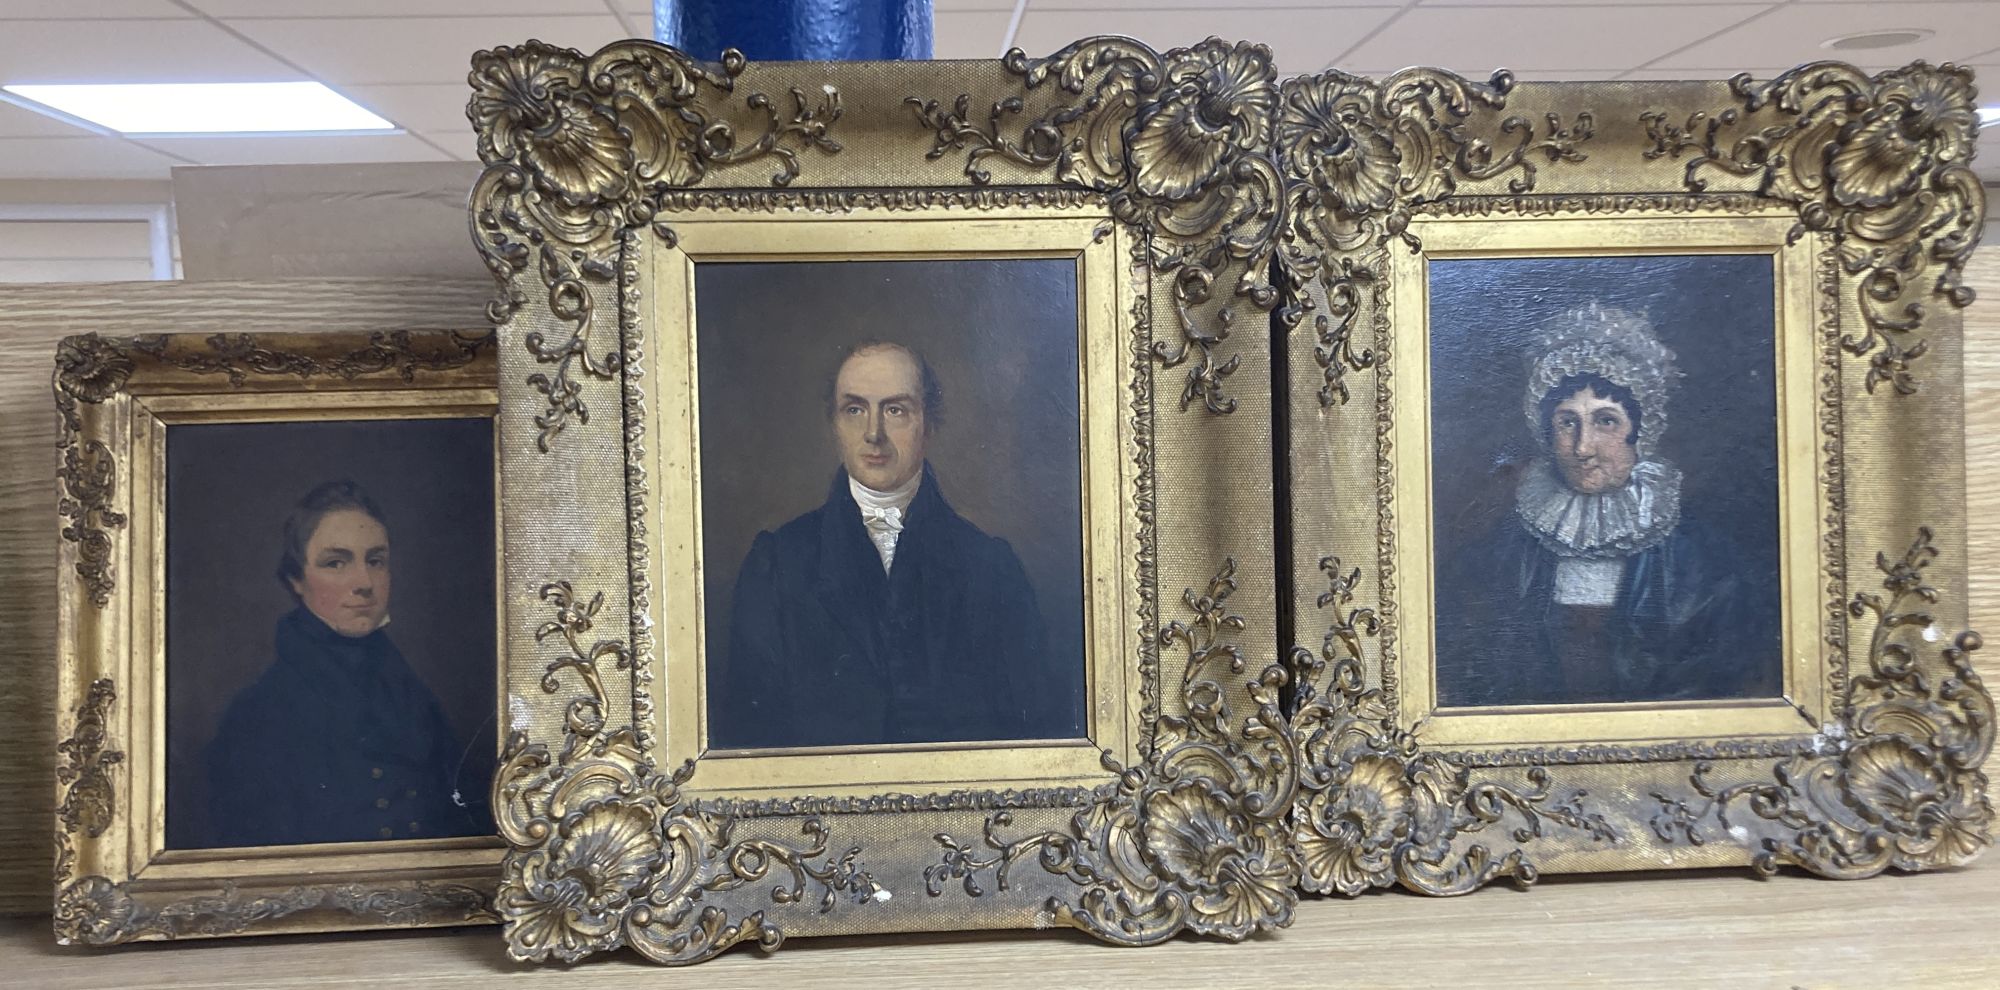 Early 19th century English School, pair of oils on mill board, Portraits of Walter and Sarah Parsons, he 1773-1848, she 1771-1827, 24 x